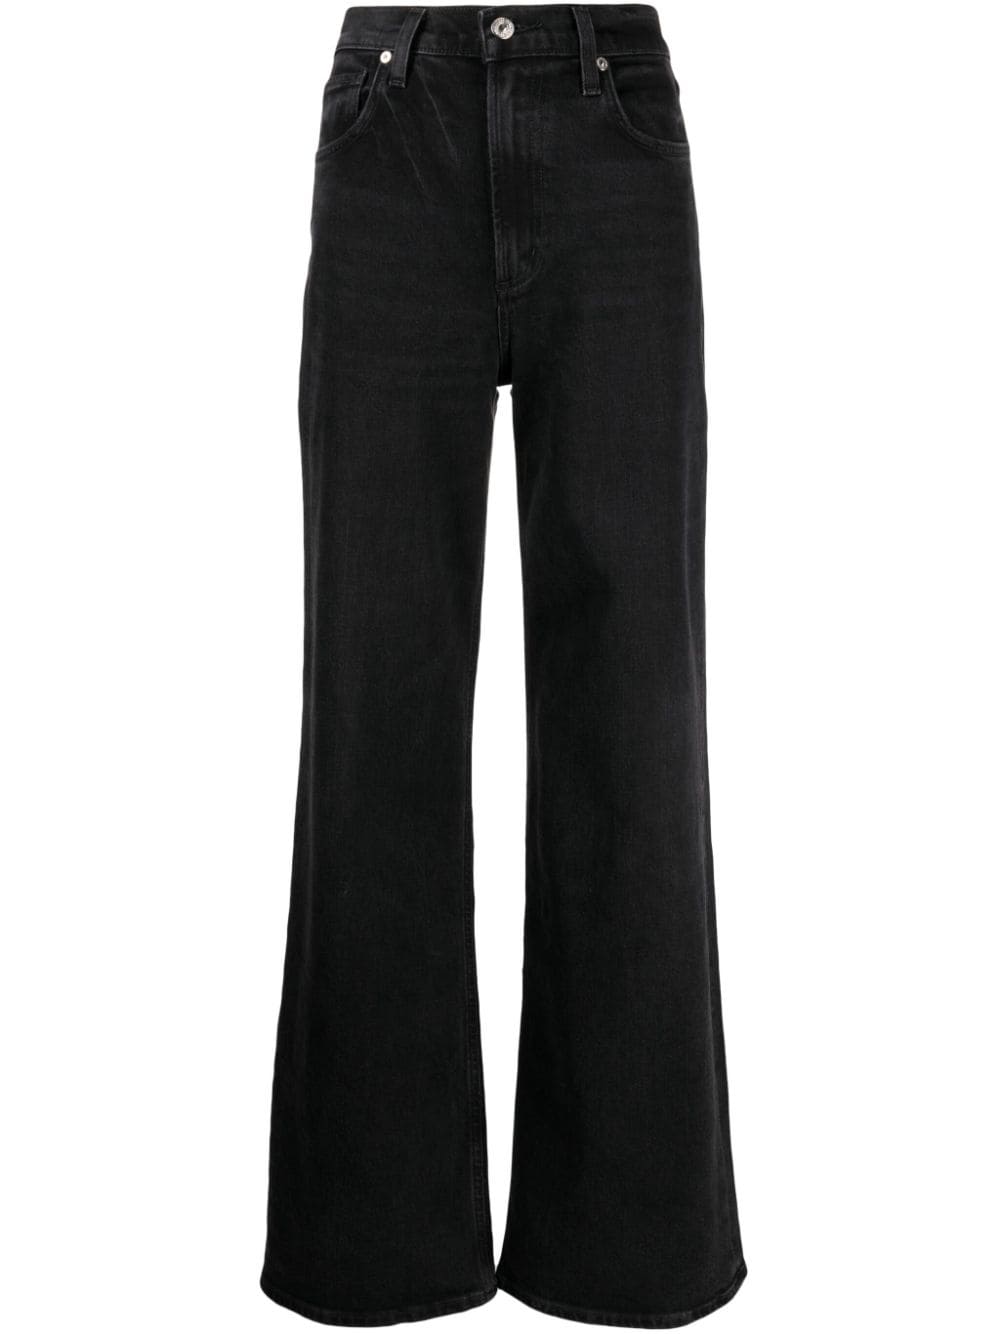 Citizens of Humanity Paloma wide-leg jeans - Black von Citizens of Humanity